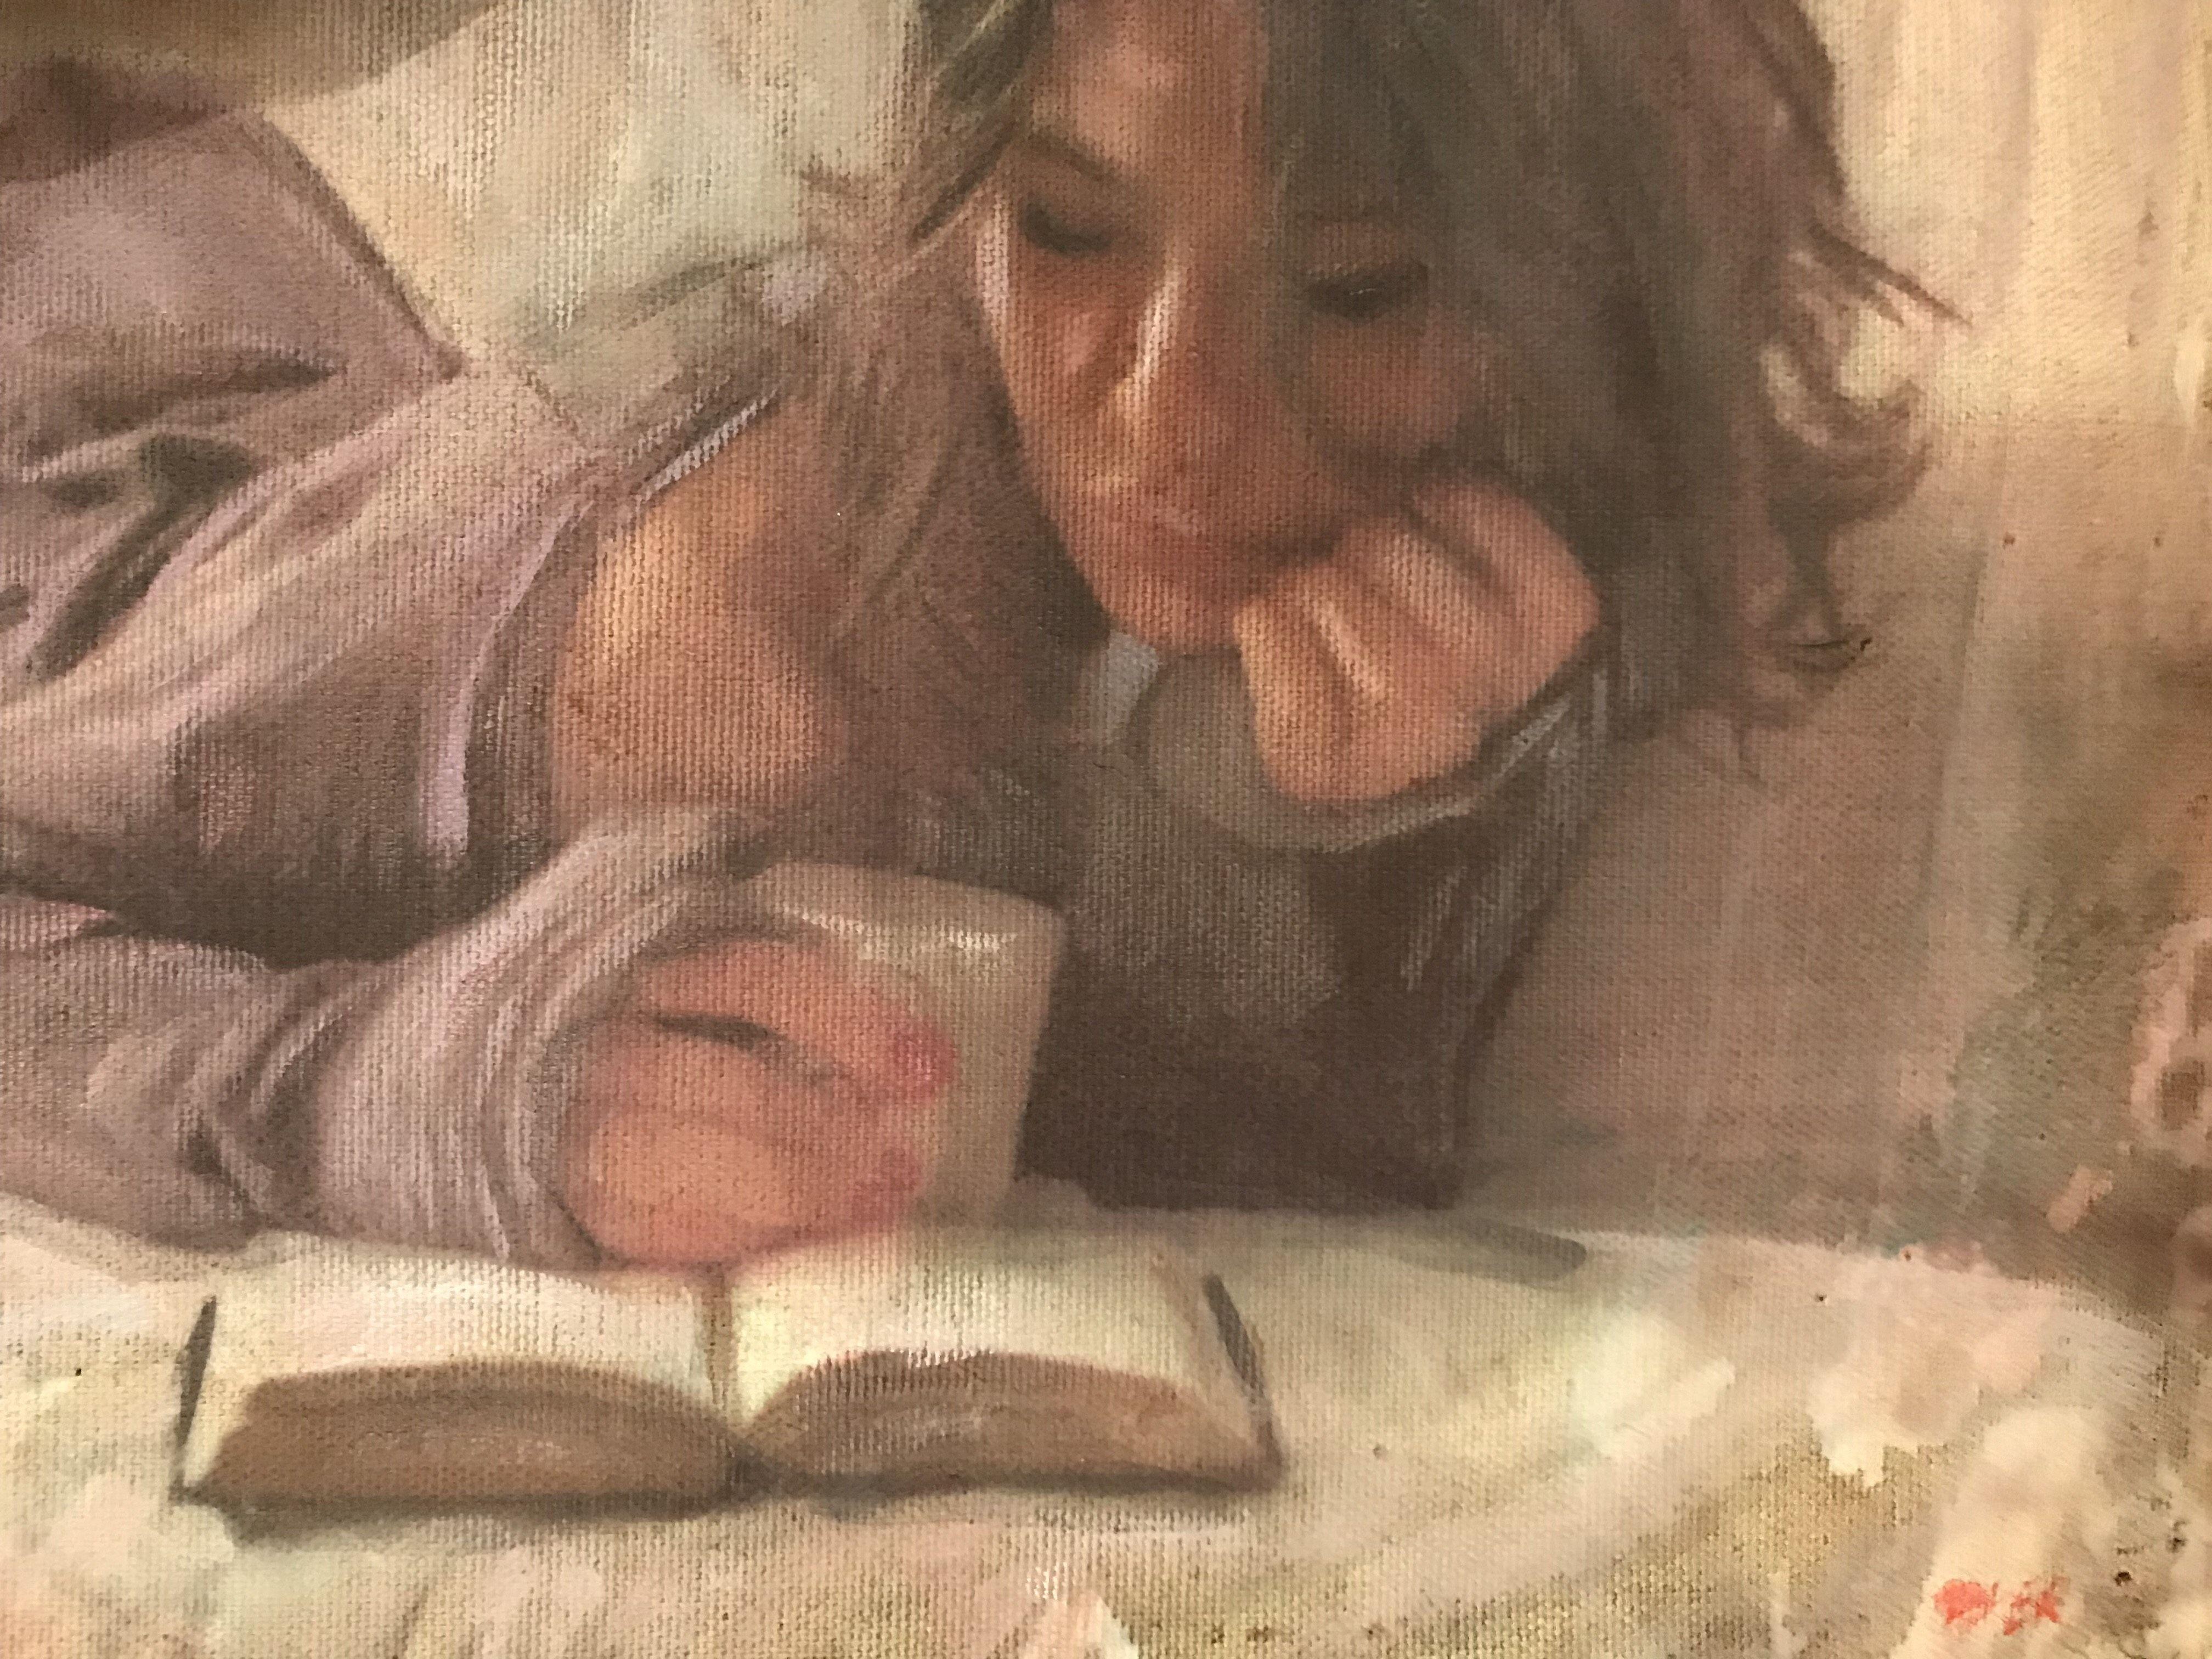 Acrylic on Canvas, framed to Guild of Framers Museum Standard. Here is a young woman completely at ease with herself and involved and immersed completely in her book. She is comfortable and happy and the afternoon sun gently lights up the room and